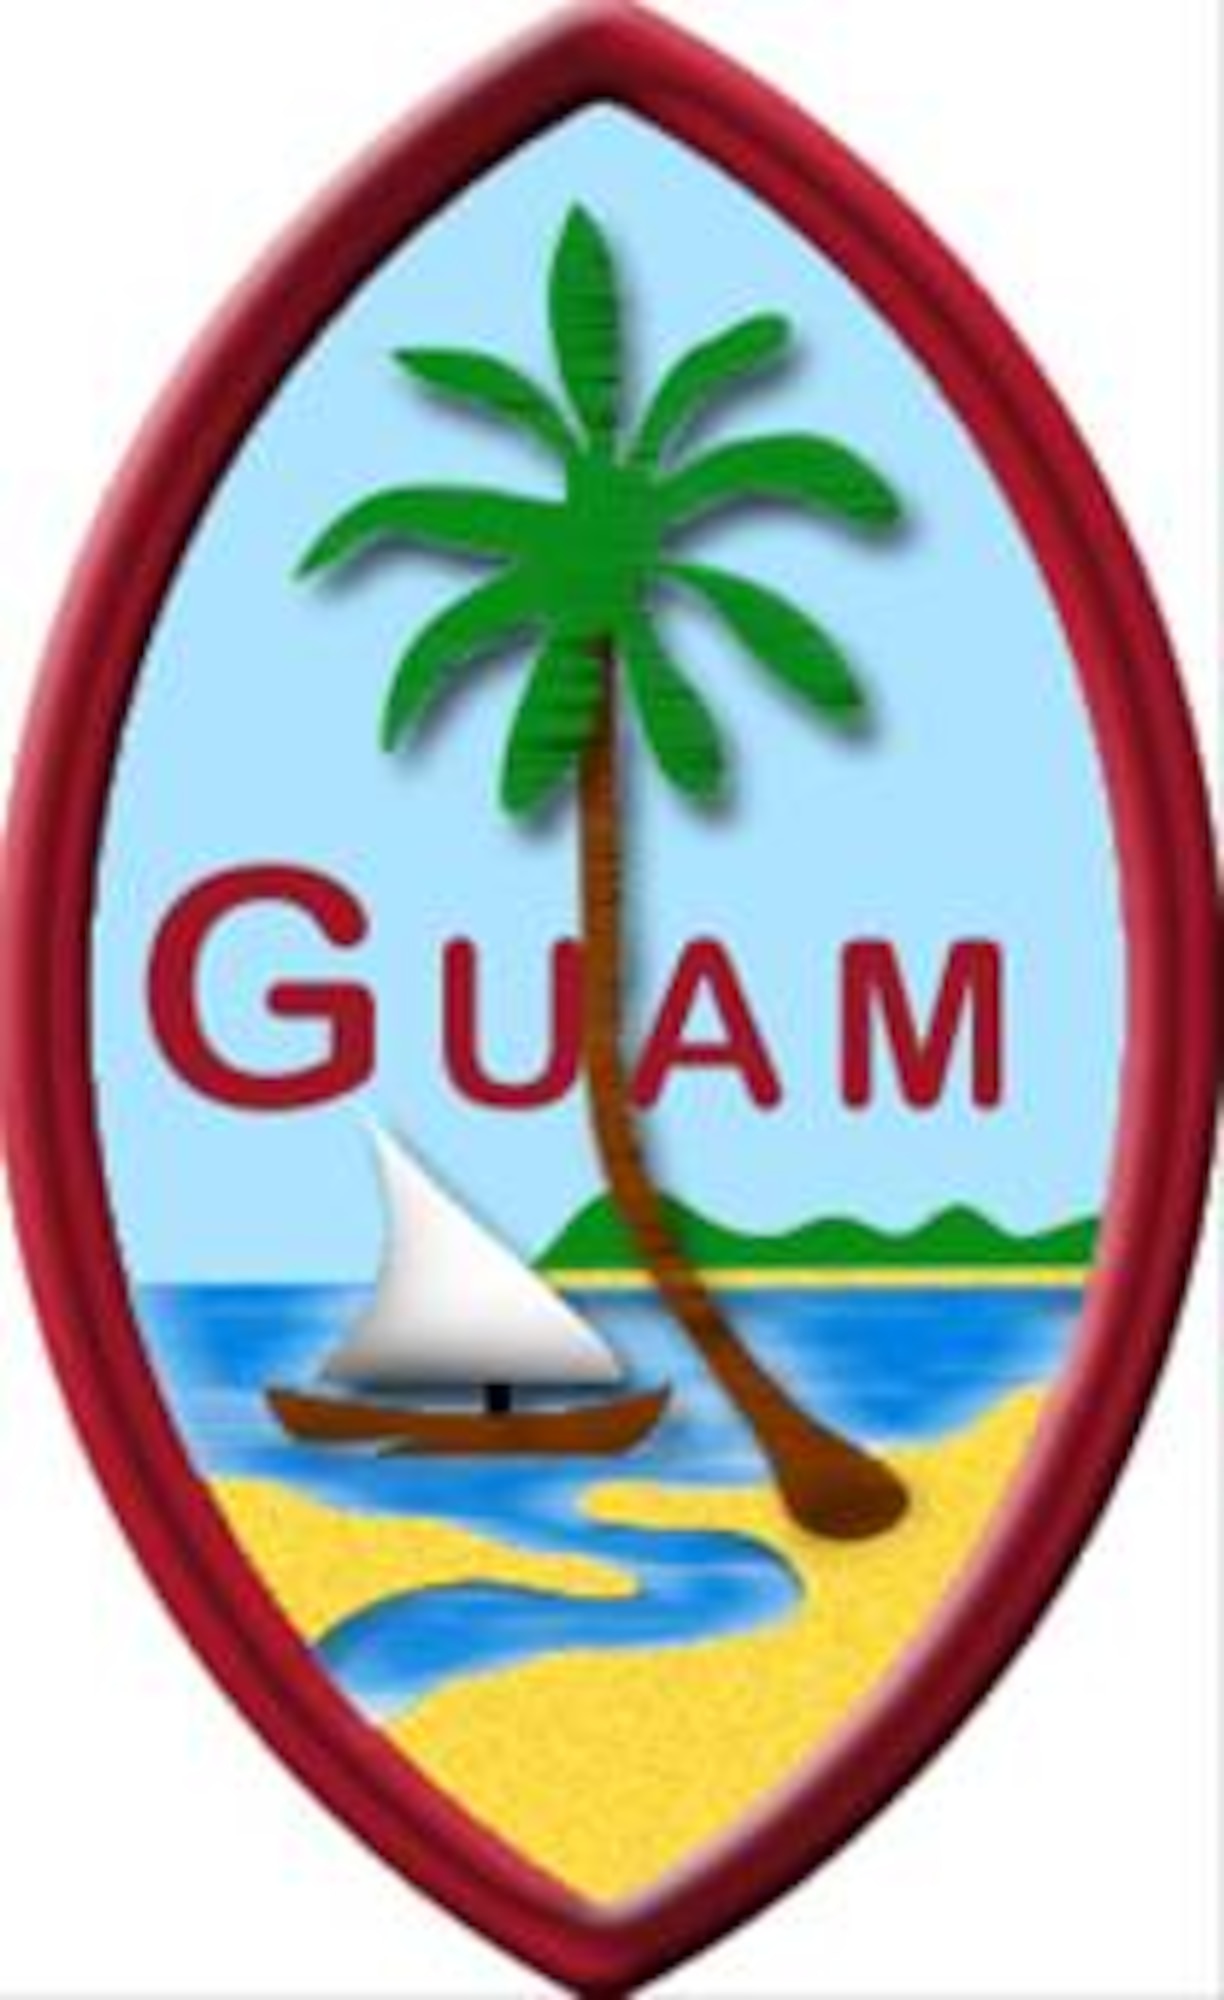 The coconut tree, also know as the 'Tree of Life" holds a dominant position on Guam's symbol. 

About the symbol: The shape of the seal is that of a Chamorro sling stone used as a weapon for warfare and hunting. The sling stone was quarried from basalt  and coral. The Coconut Tree, growing in unfertile sand, symbolizes self-sustanance and determination to grow and survive under any circumstance, with its fronds open to the sky -- defies the elements to bend its will. Its bent trunk attests to a people which have been tested by famine, natural calamities, genocide and foreign wars but have continued to endure as a race.
The Flying Proa, a seagoing craft built by the Chamorro people, which was fast and agile in the water required great skill to build and sail. The River channel, where fresh water rush out to interact with the ocean, symbolizes a willingness to share the resources of the land with others. The permanence of the land mass of Hila'an in the background demonstrates the Chamorro's commitment to their homeland and environment, be it sea or land.
Also in the background, "Two Lover's Point" juts majestically into the endless waters of the sea, protraying the people's faithful commitment to passing their proud heritage, culture, and language to the endless sea of future generations.